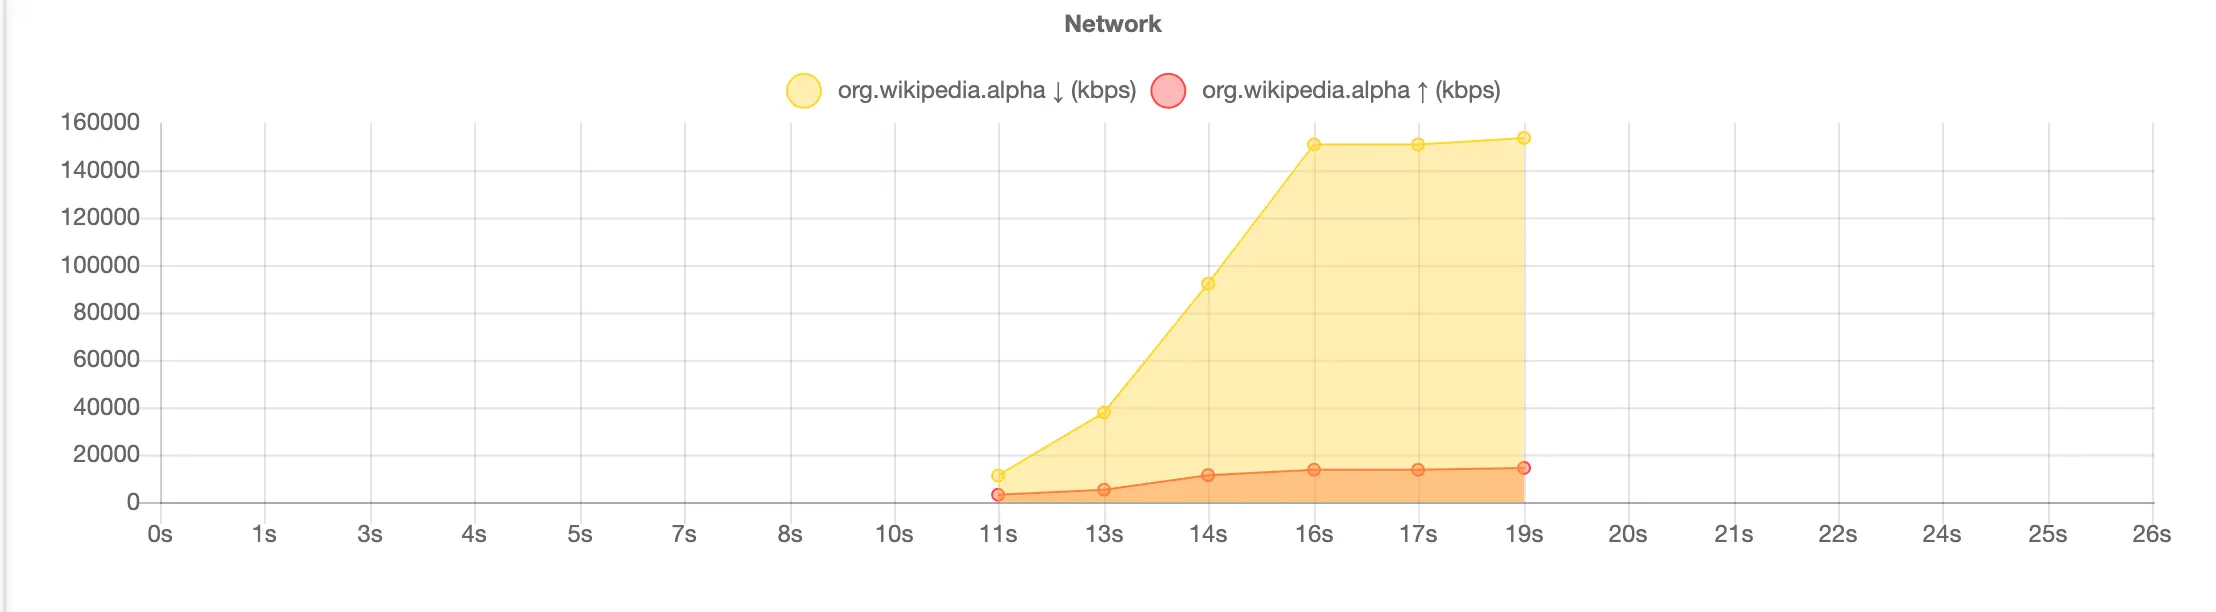 View the network activity on a timeline, showing data sent or received